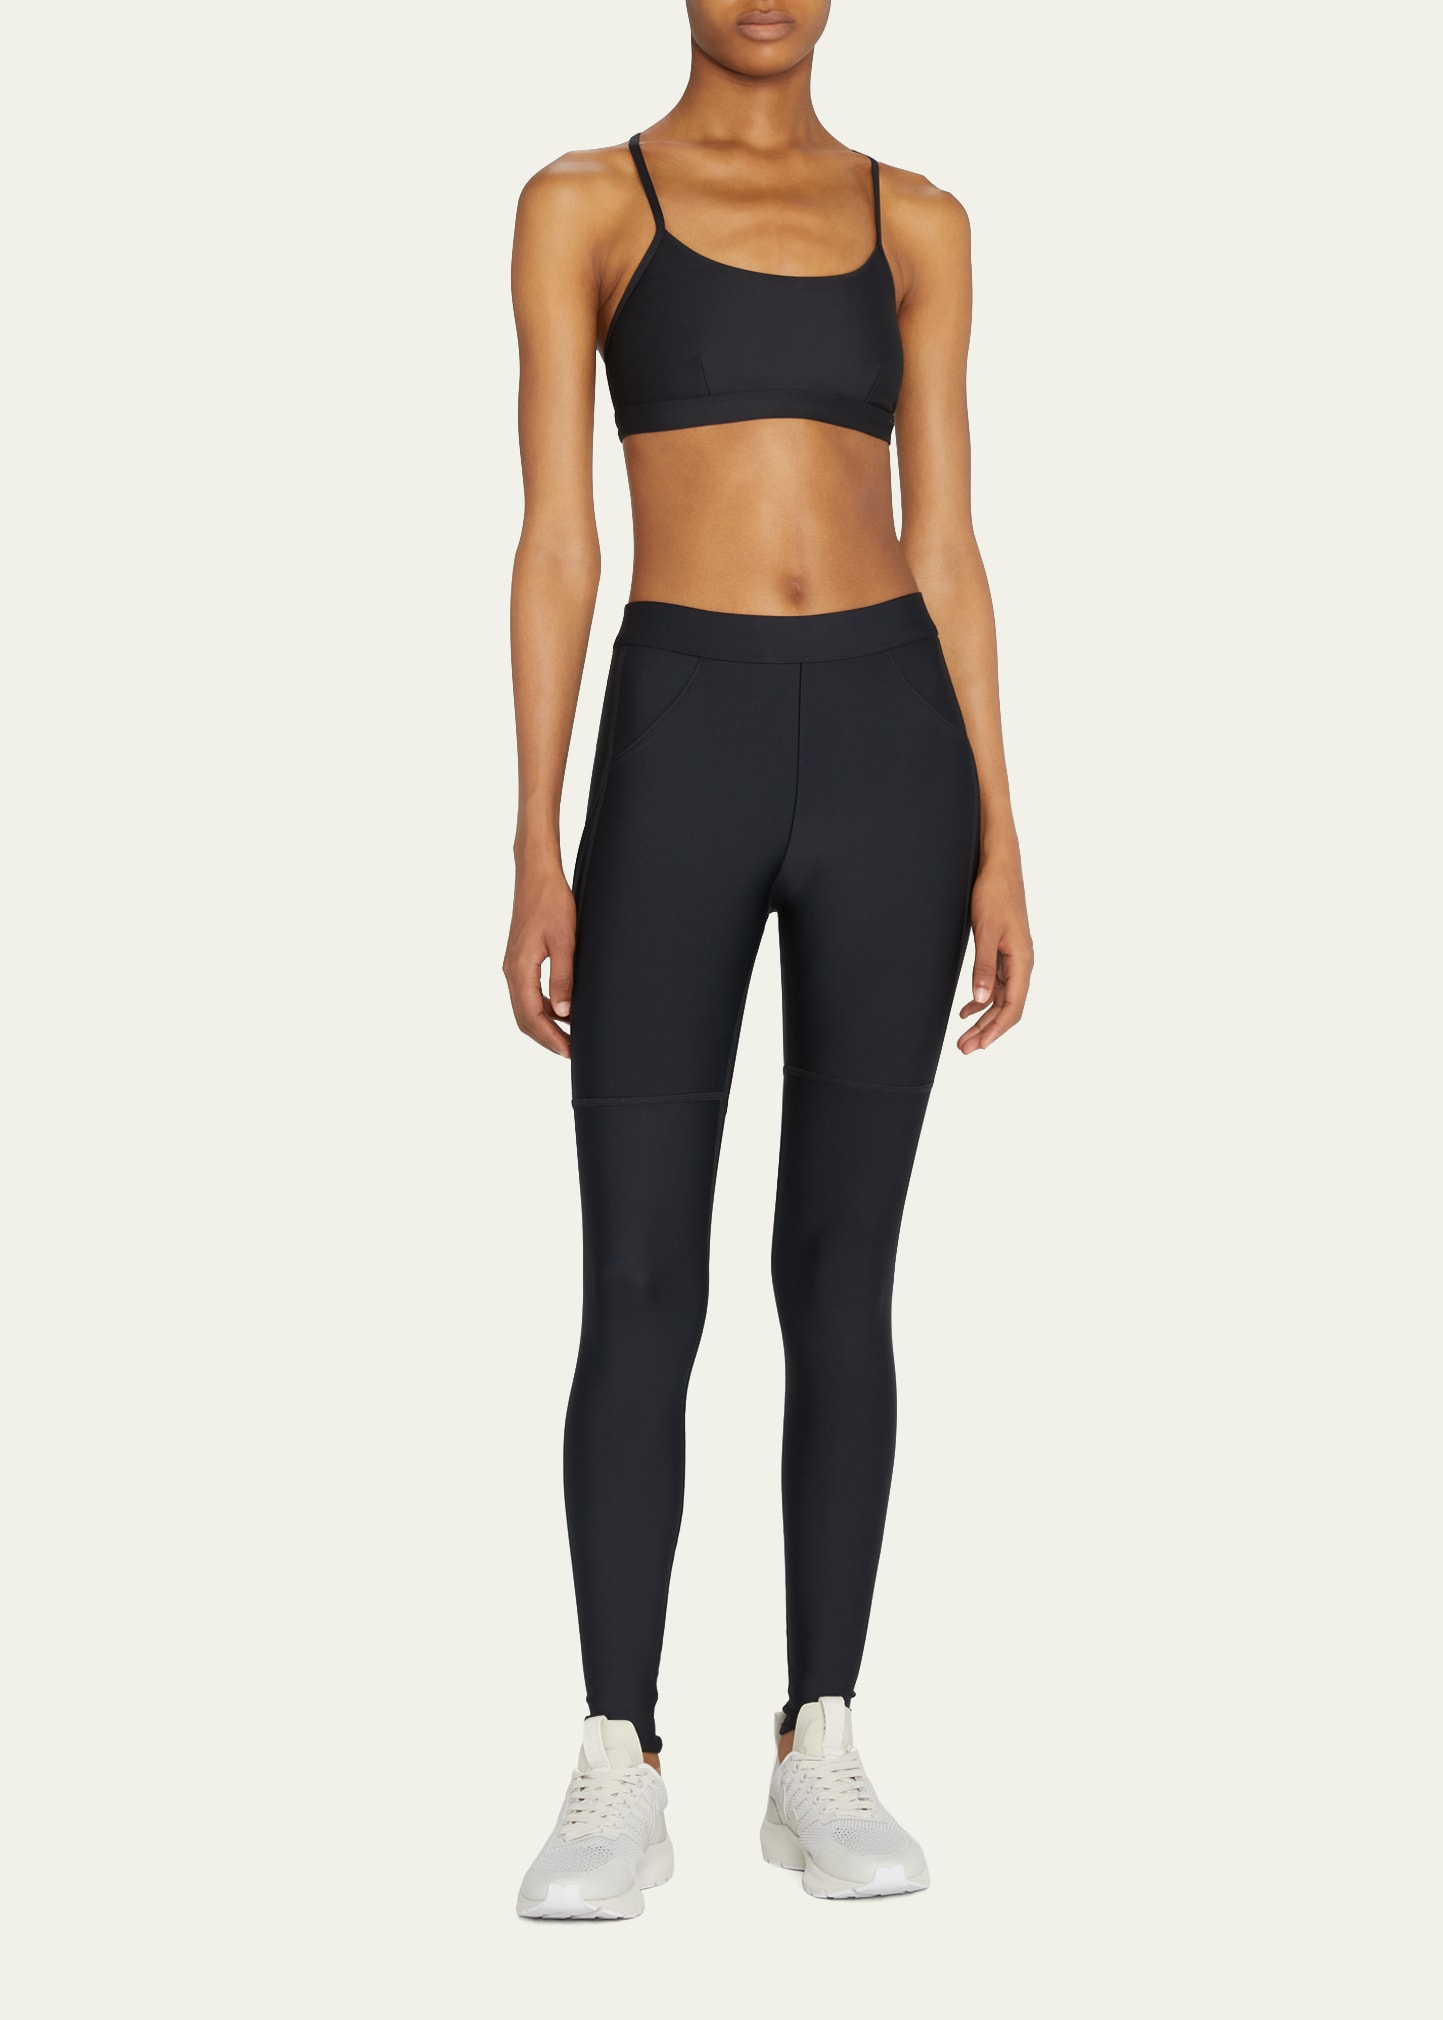 ALO YOGA AIRLIFT INTRIGUE LOW-IMPACT SPORTS BRA